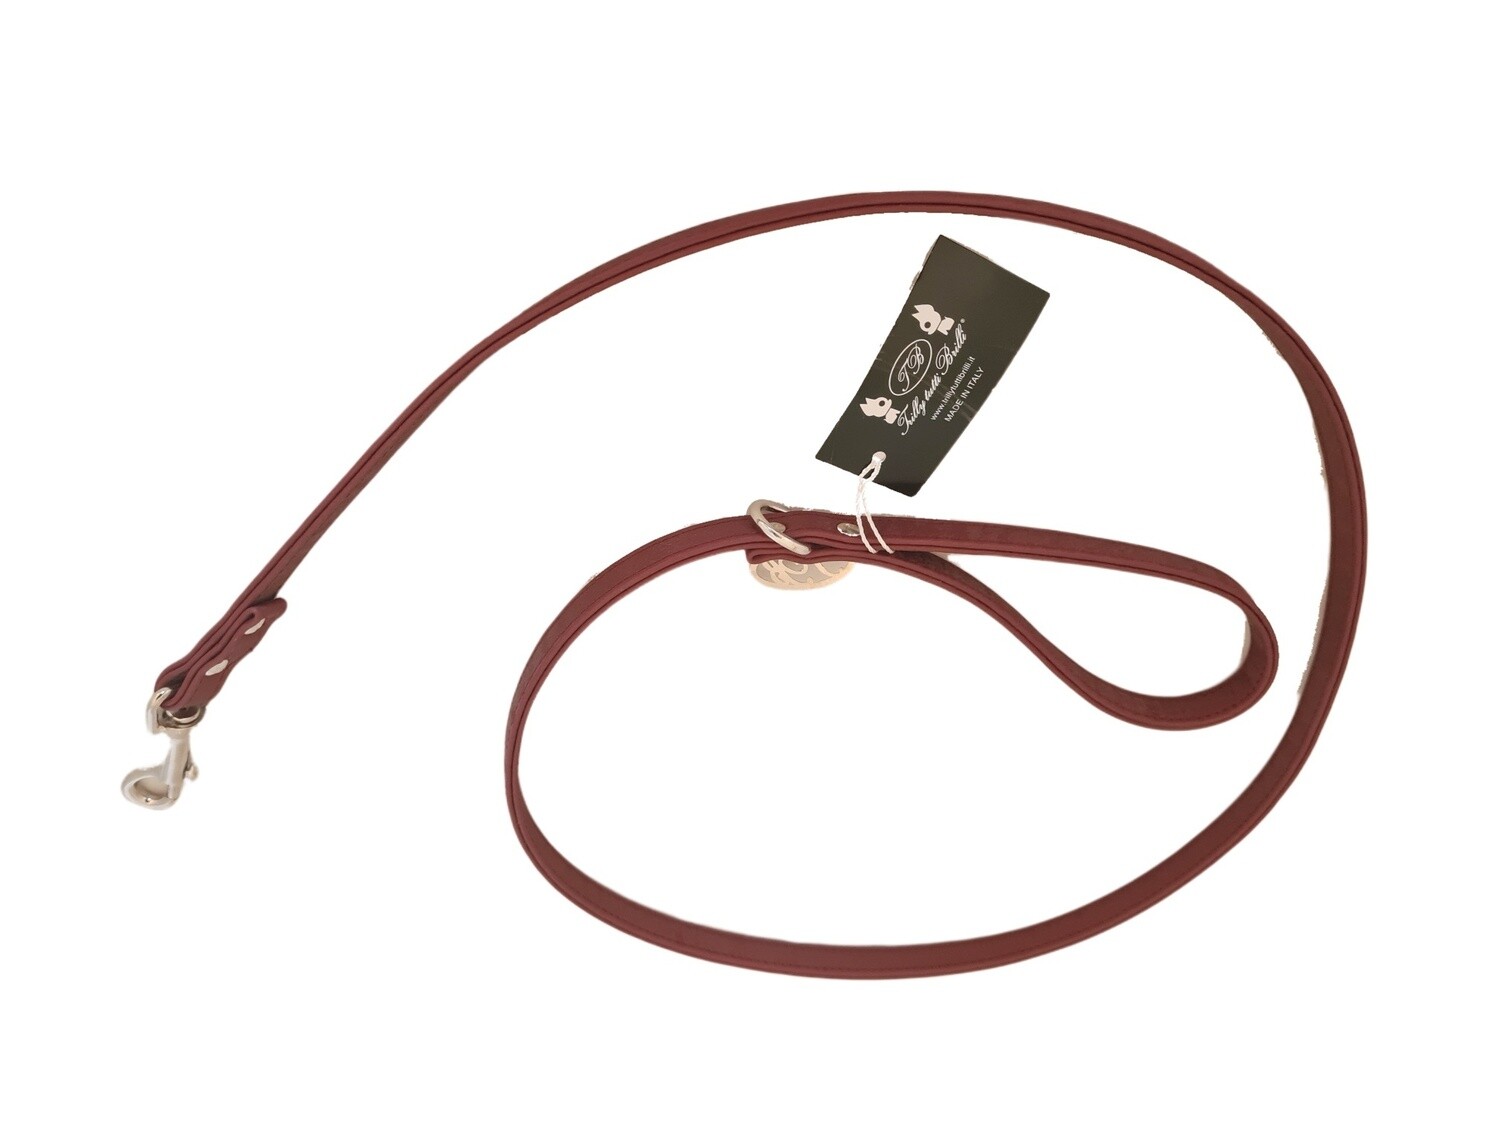 Lione Leash Trilly 38 burgundy embossed - Stock